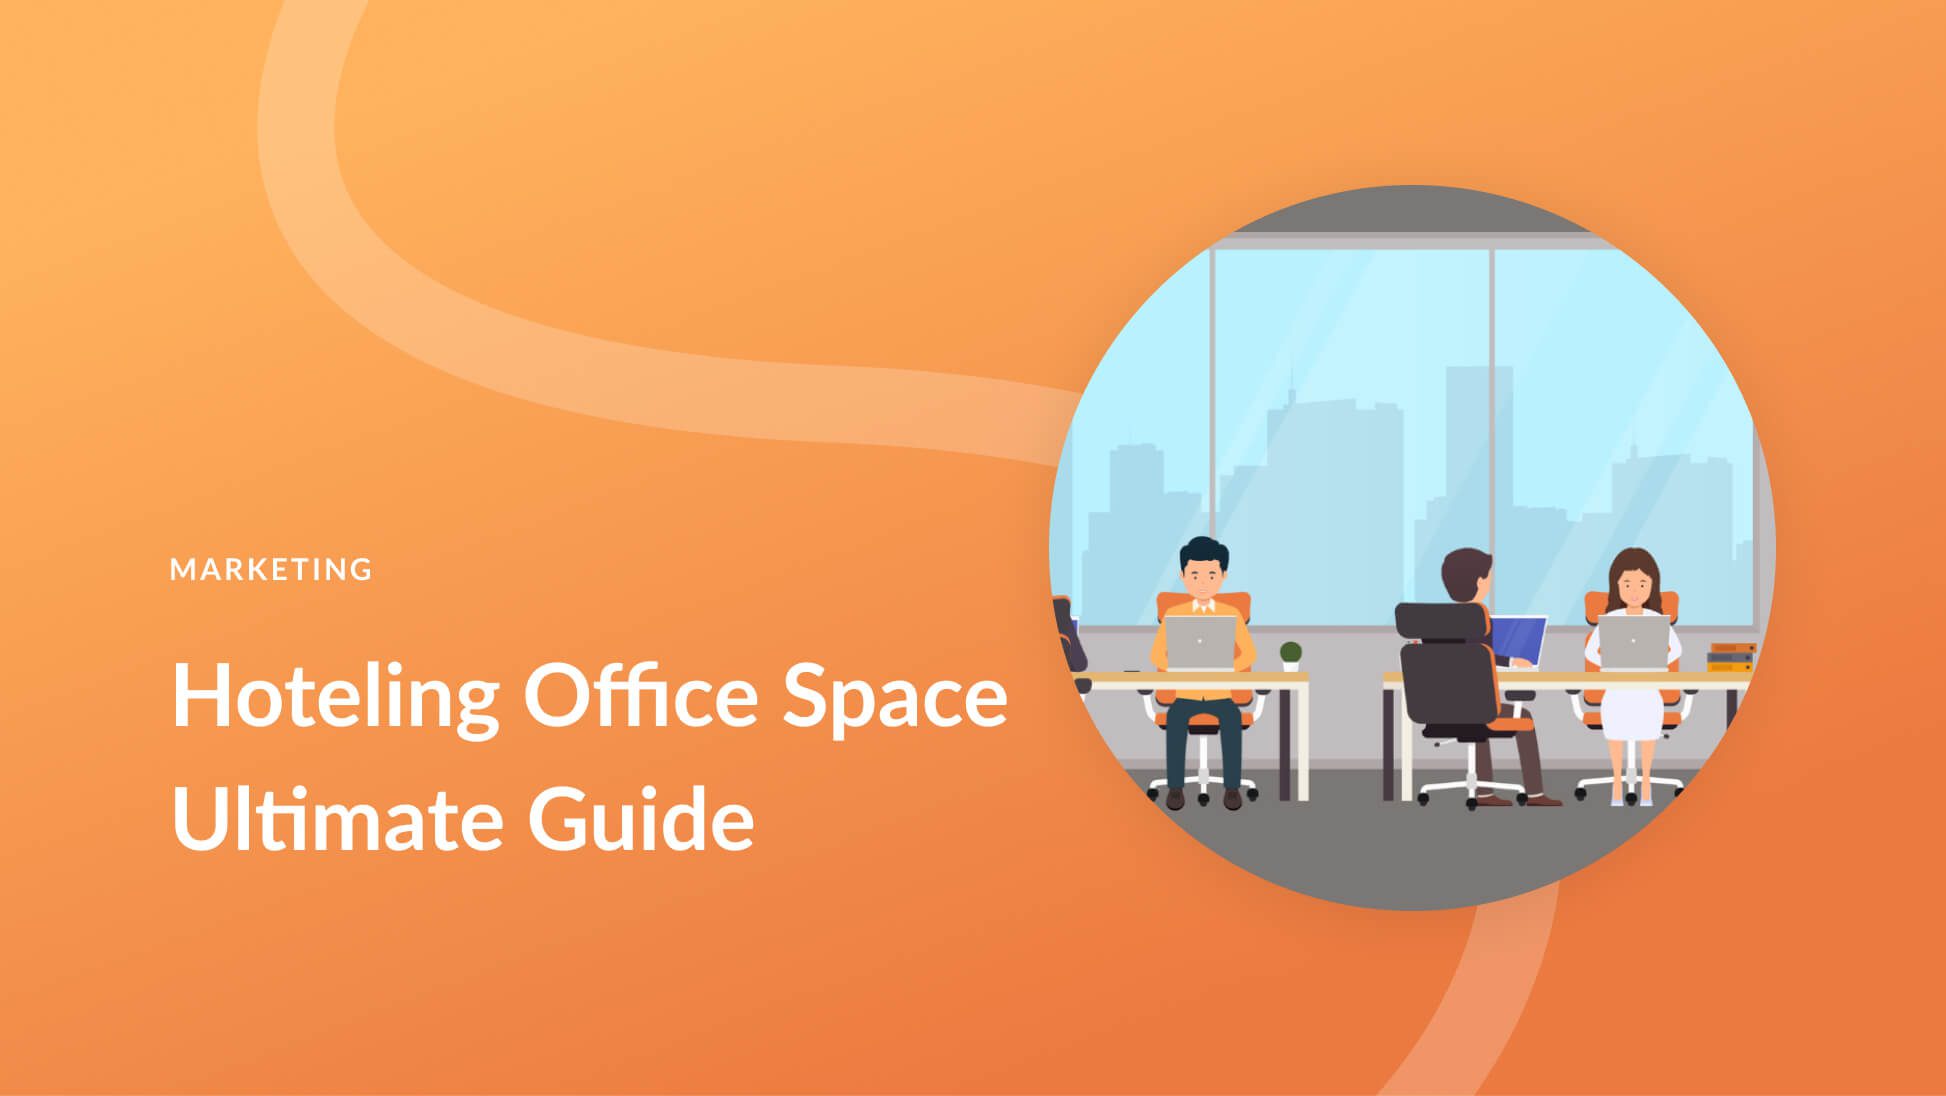 The Ultimate Guide to Hoteling Your Office Space